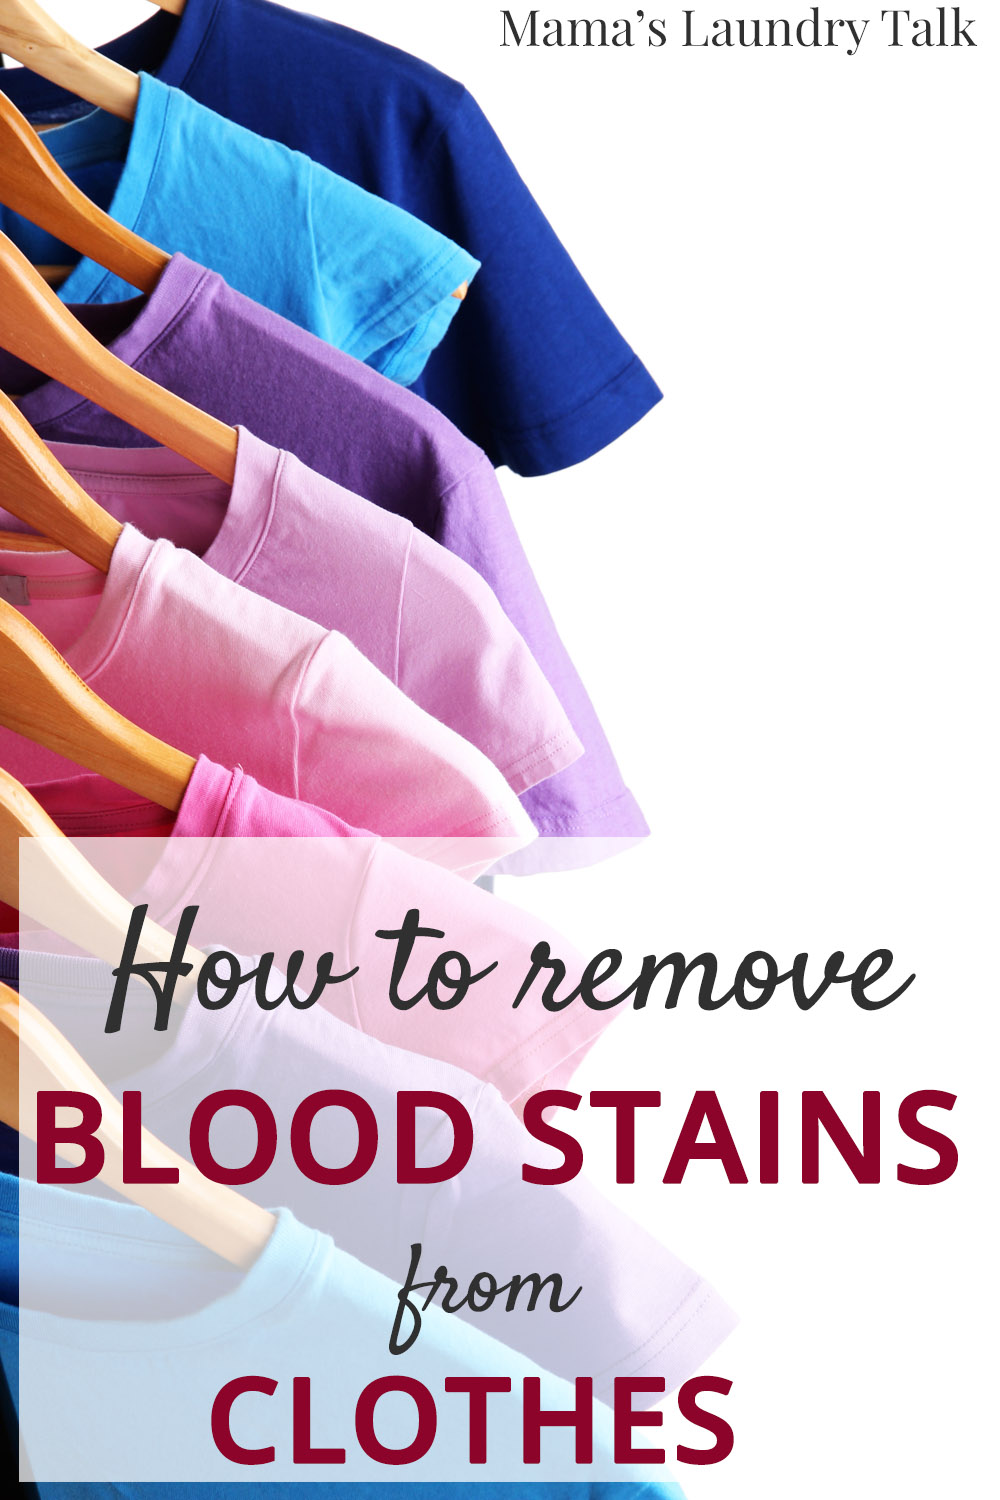 How To Remove Blood Stains From Upholstery - Mouths of Mums